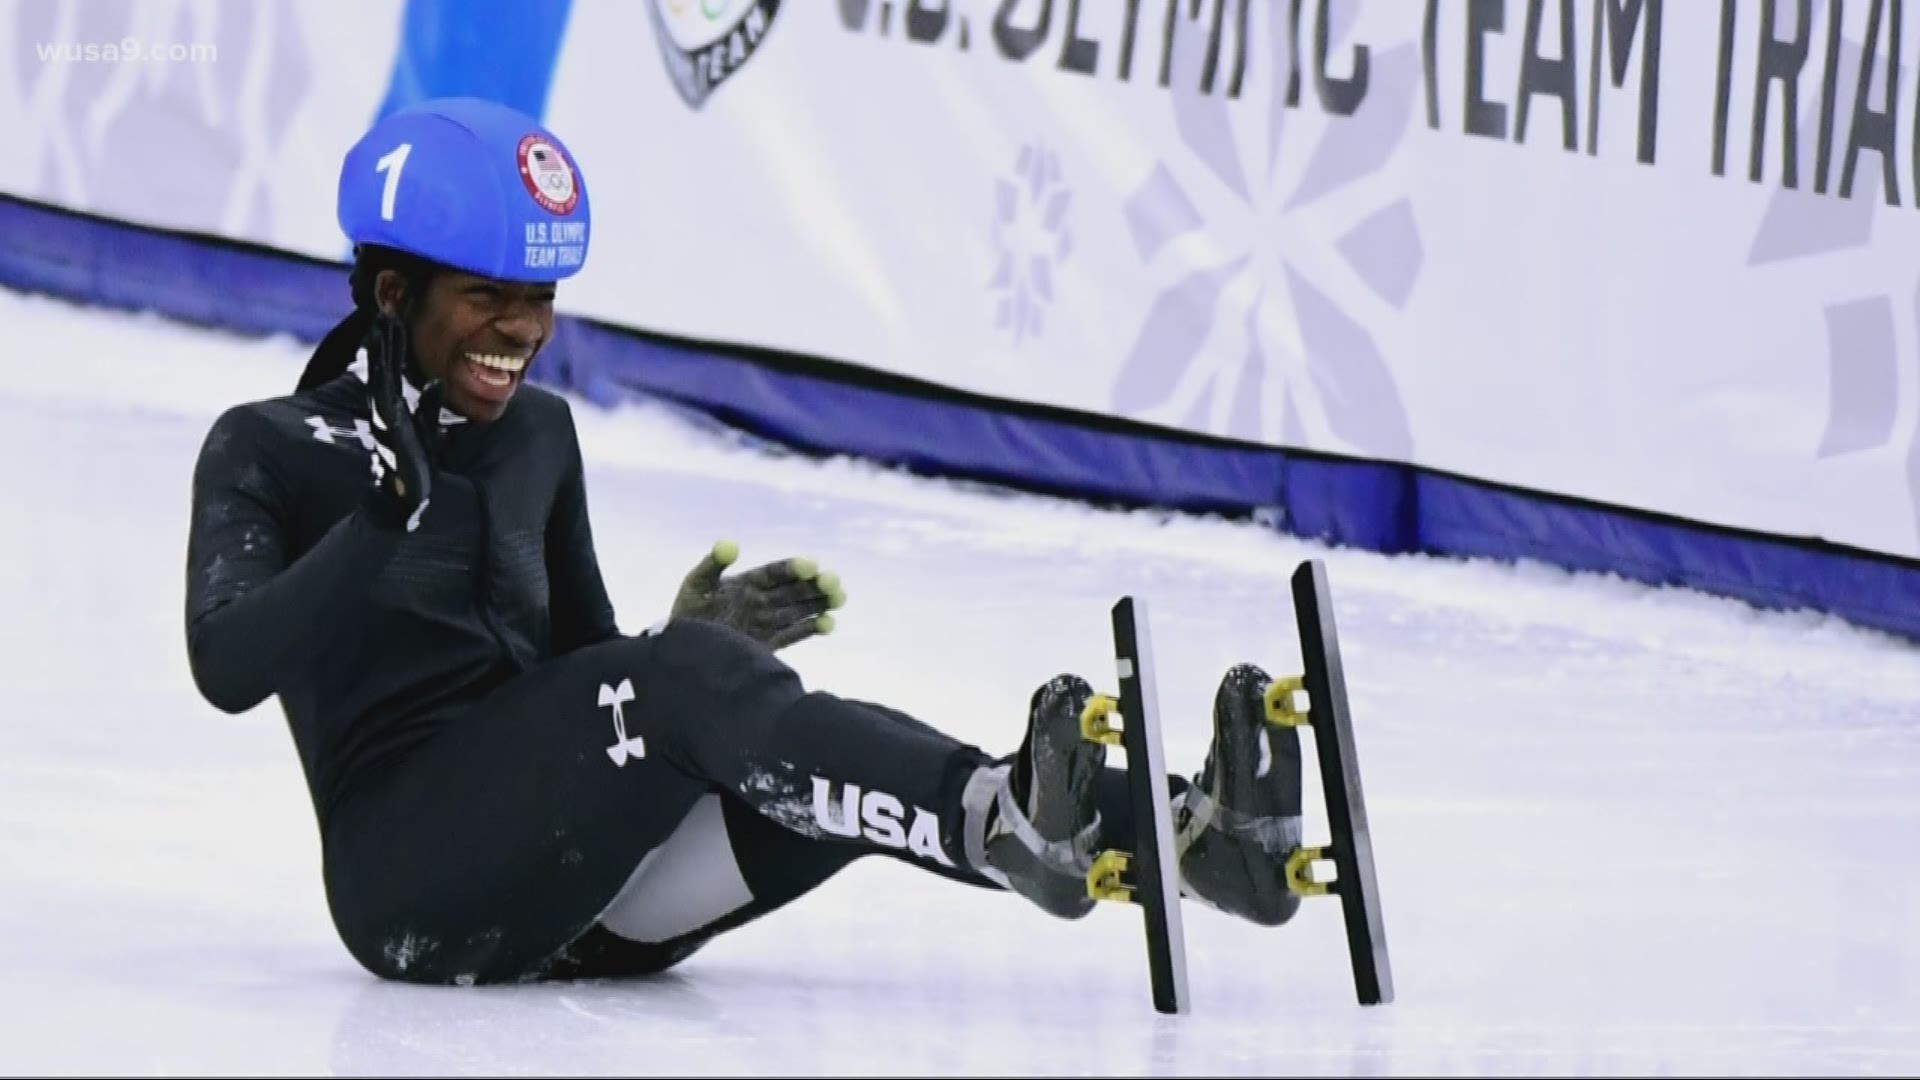 We all don't have the opportunity to live out our dreams, but for Maame Biney - her dream came true. The teenager is making history as she heads to the Olympics as a speed skater.